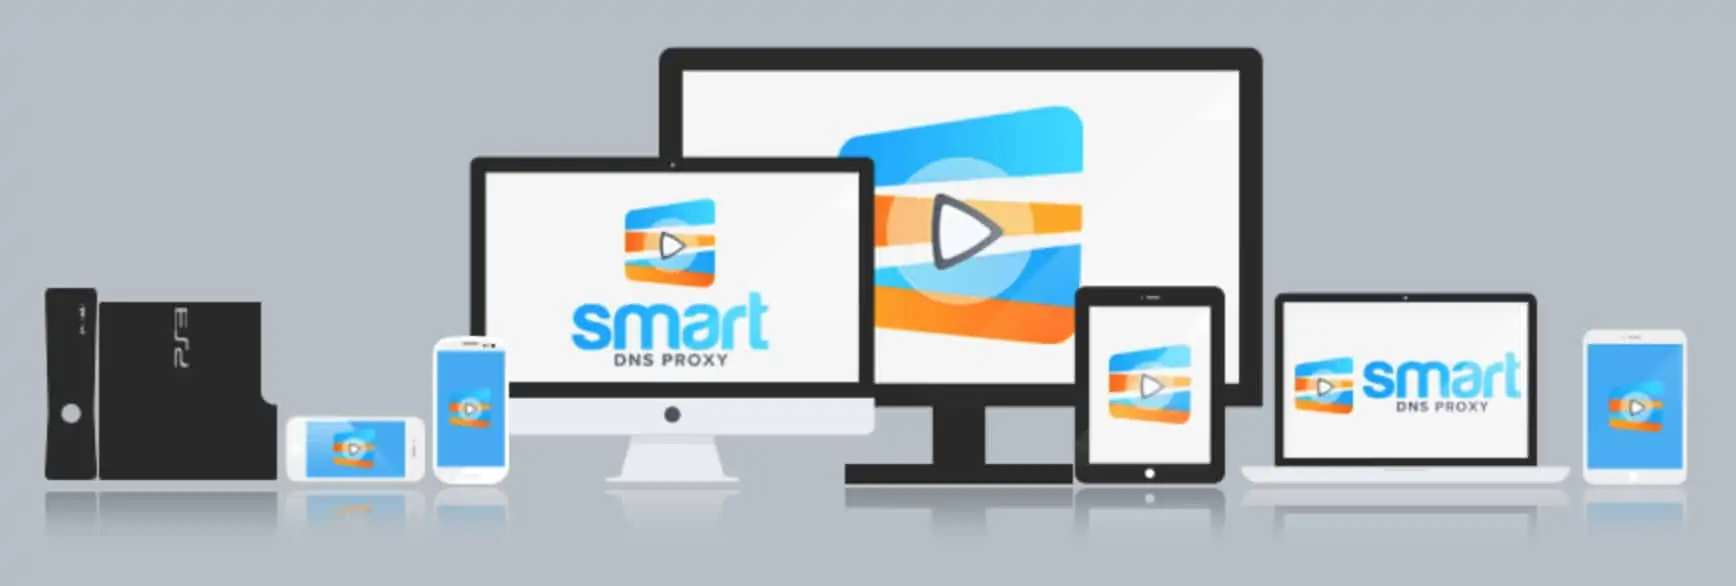 SmartDNSProxy - Devices